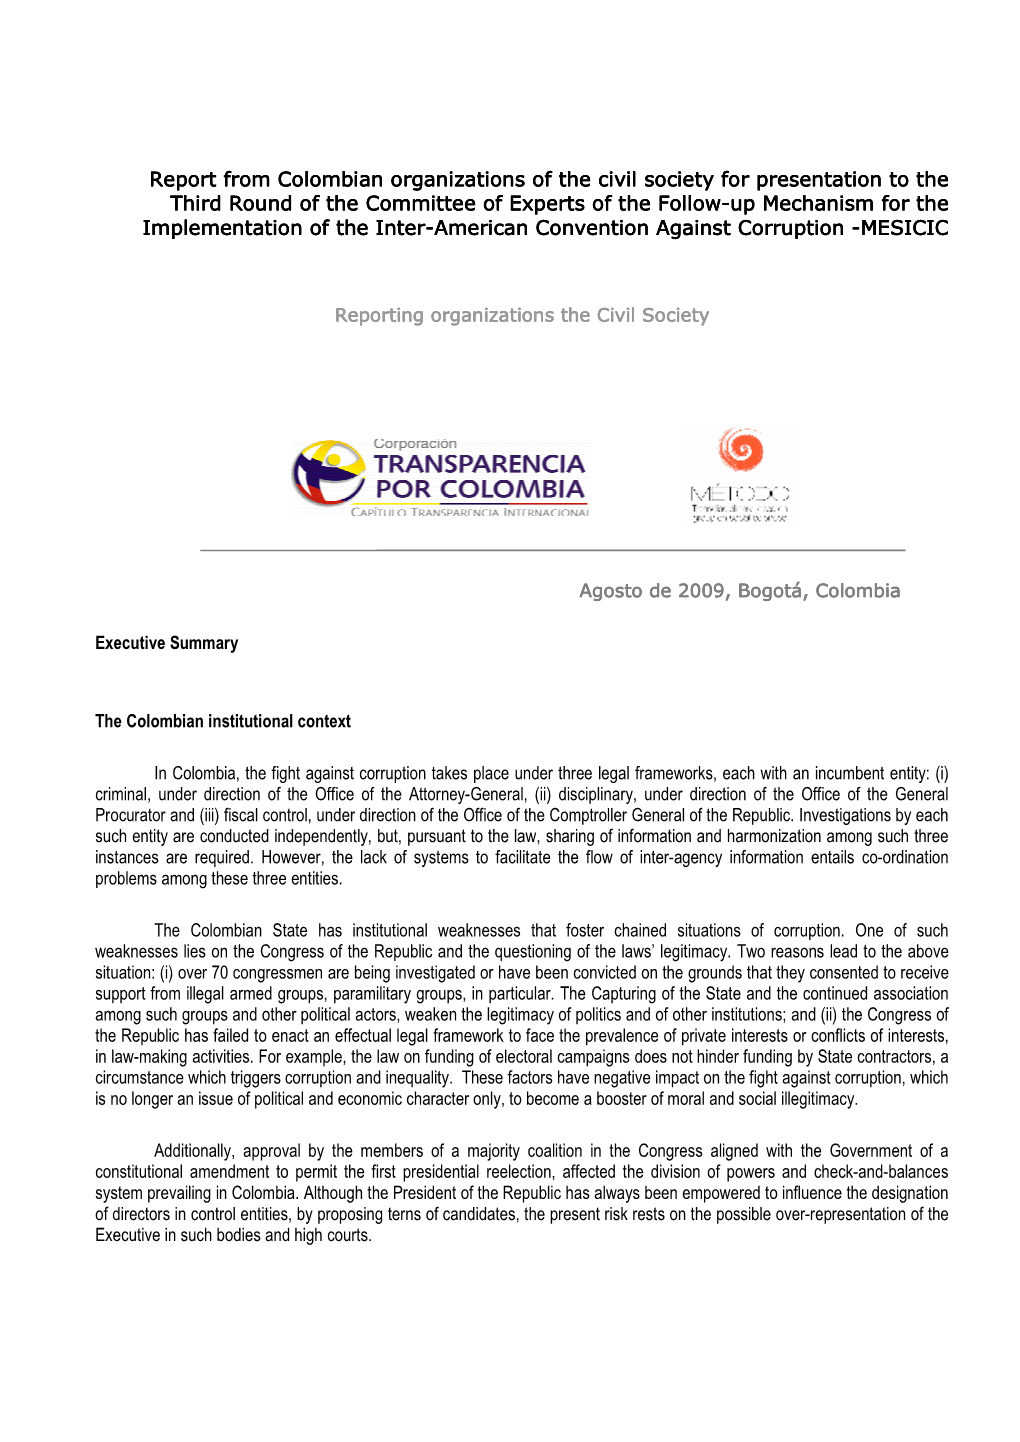 Report from Report from Colombian Organizations of the Civil Society